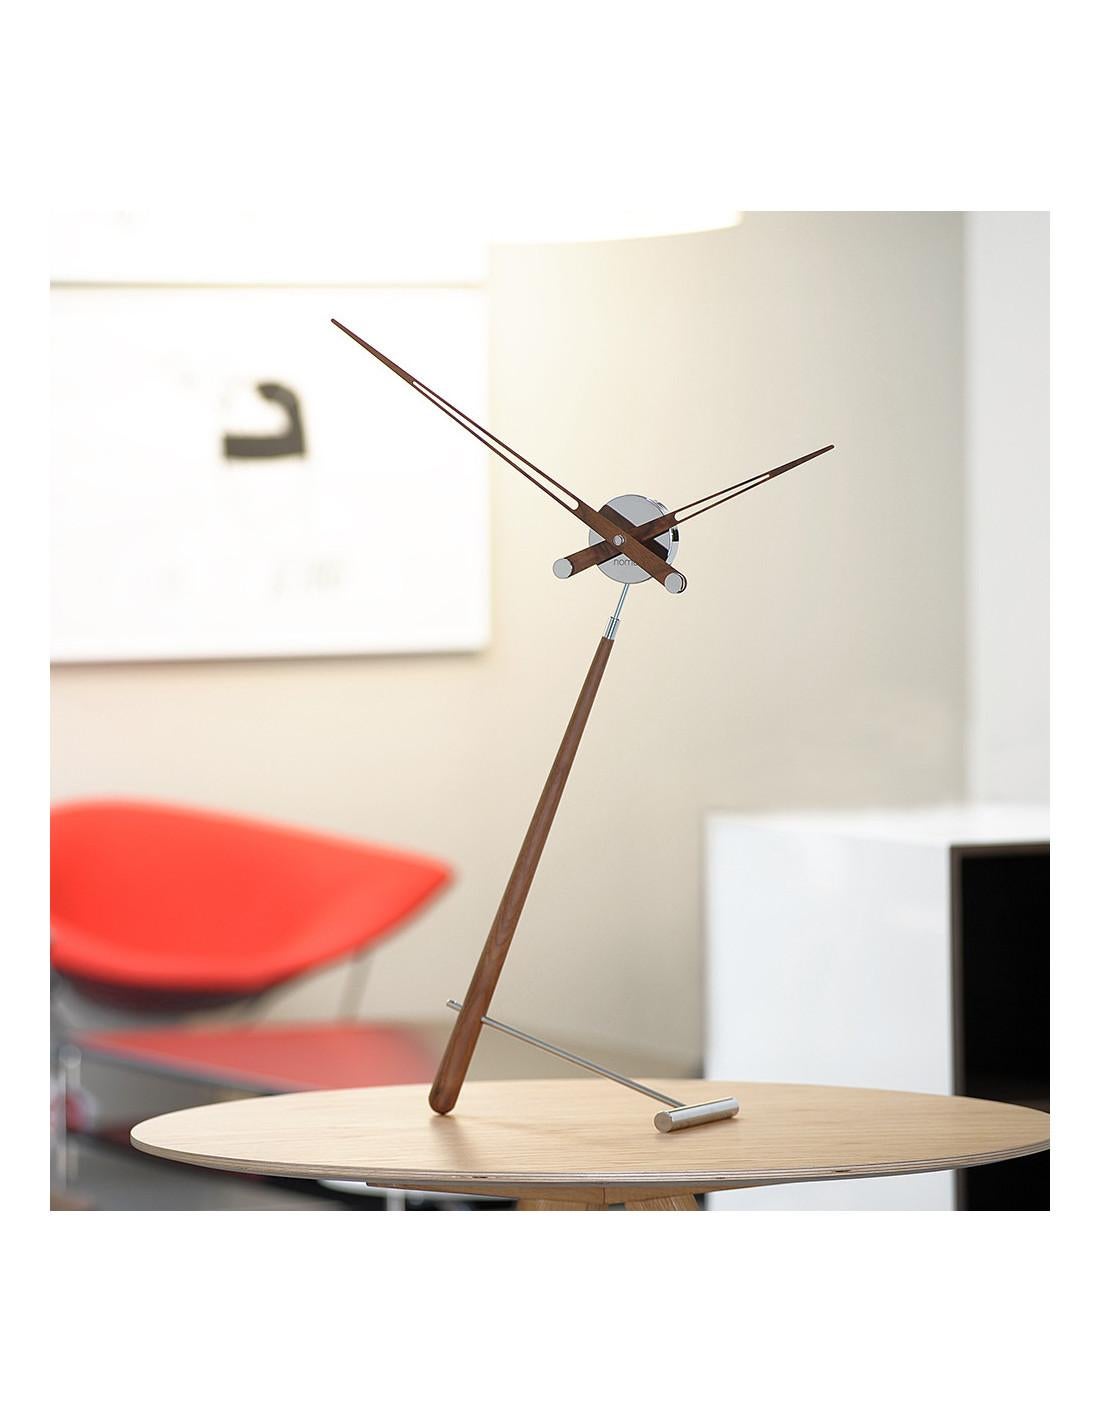 Puntero N table clock is a clock whose design makes it an elegant and stylish decorative piece.
The German UTS mechanism guarantees the accuracy of its operation over the years.
Puntero N table clock : Box in chromed brass, hands and body in